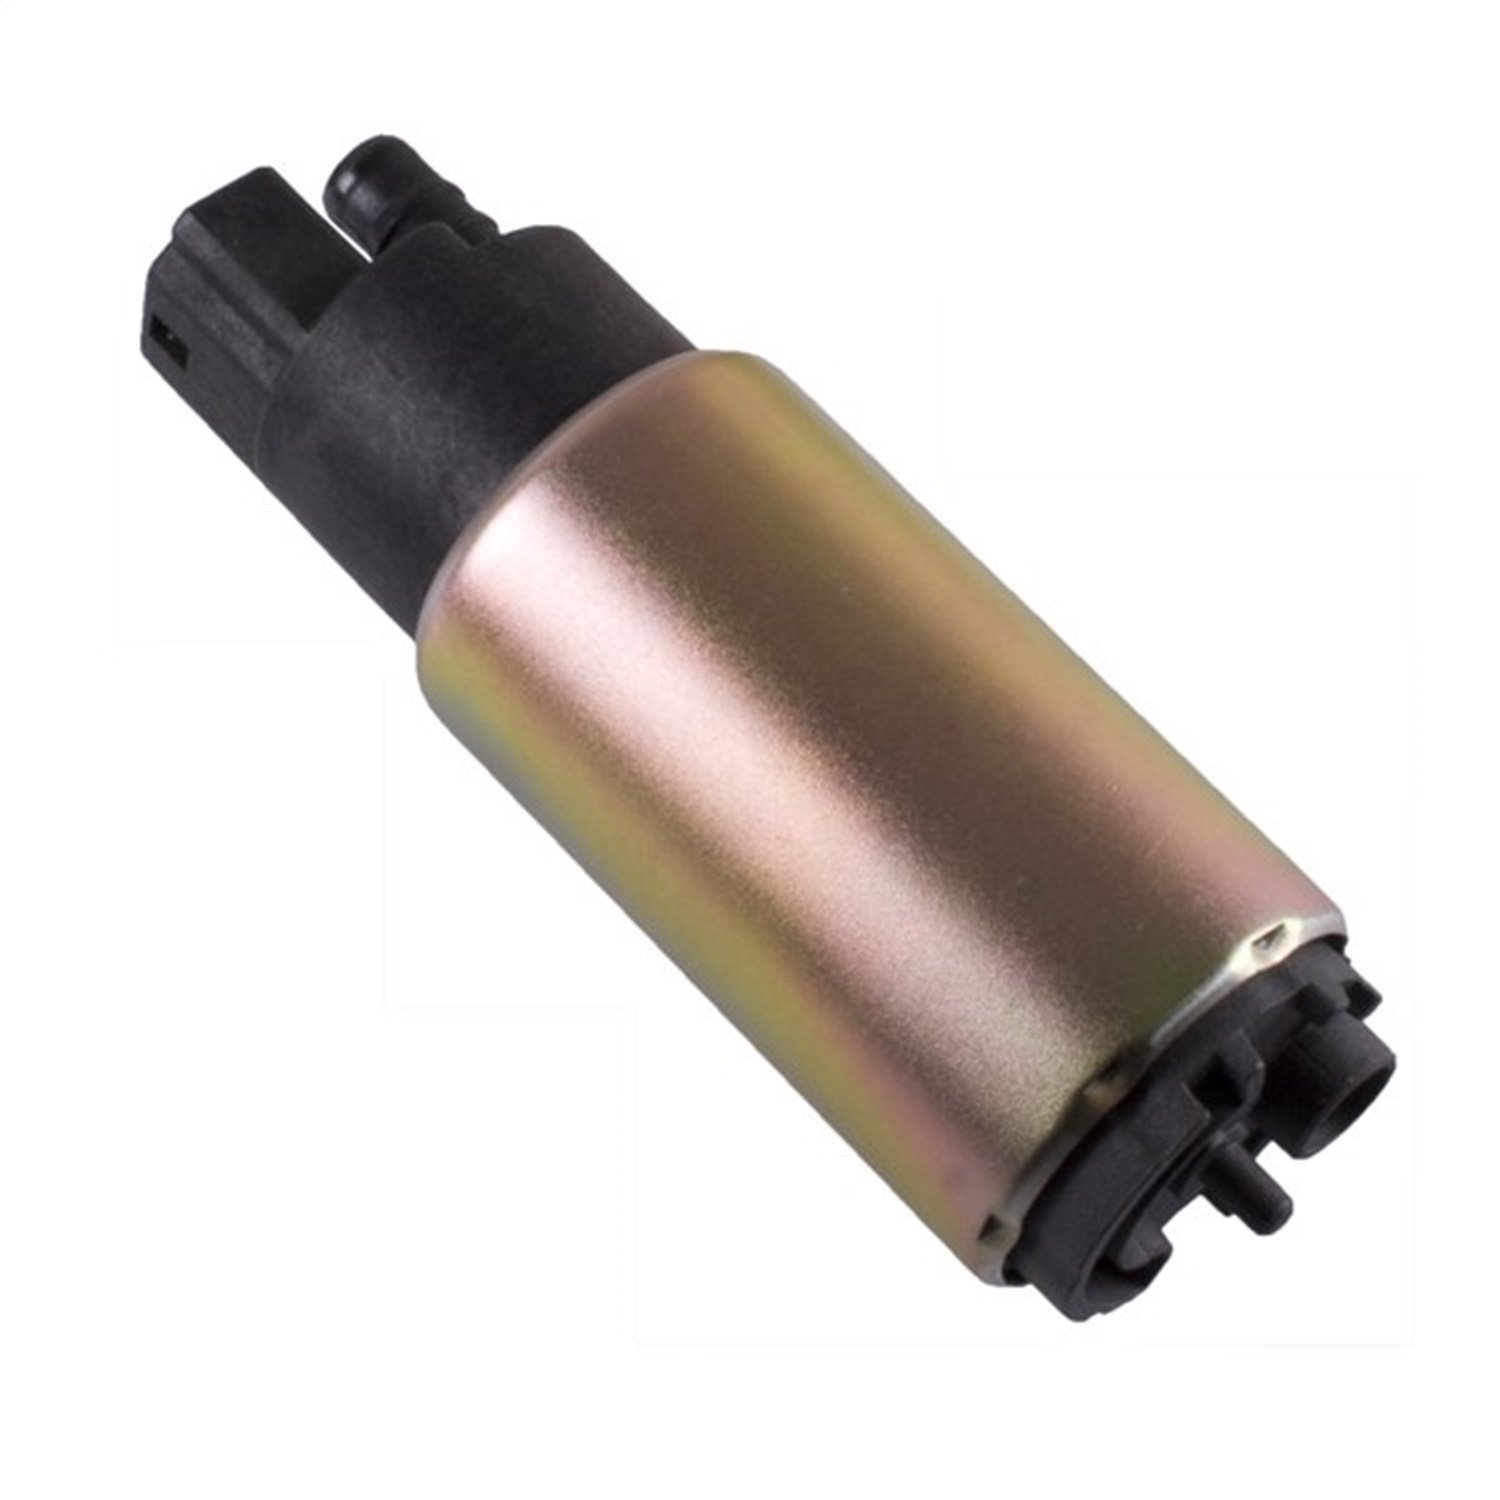 Replacement fuel pump filter from Omix-ADA, Fits 94-96 Jeep Cherokee XJ and 91-95 Wrangler YJ with 2.5L or 4.0L engines.